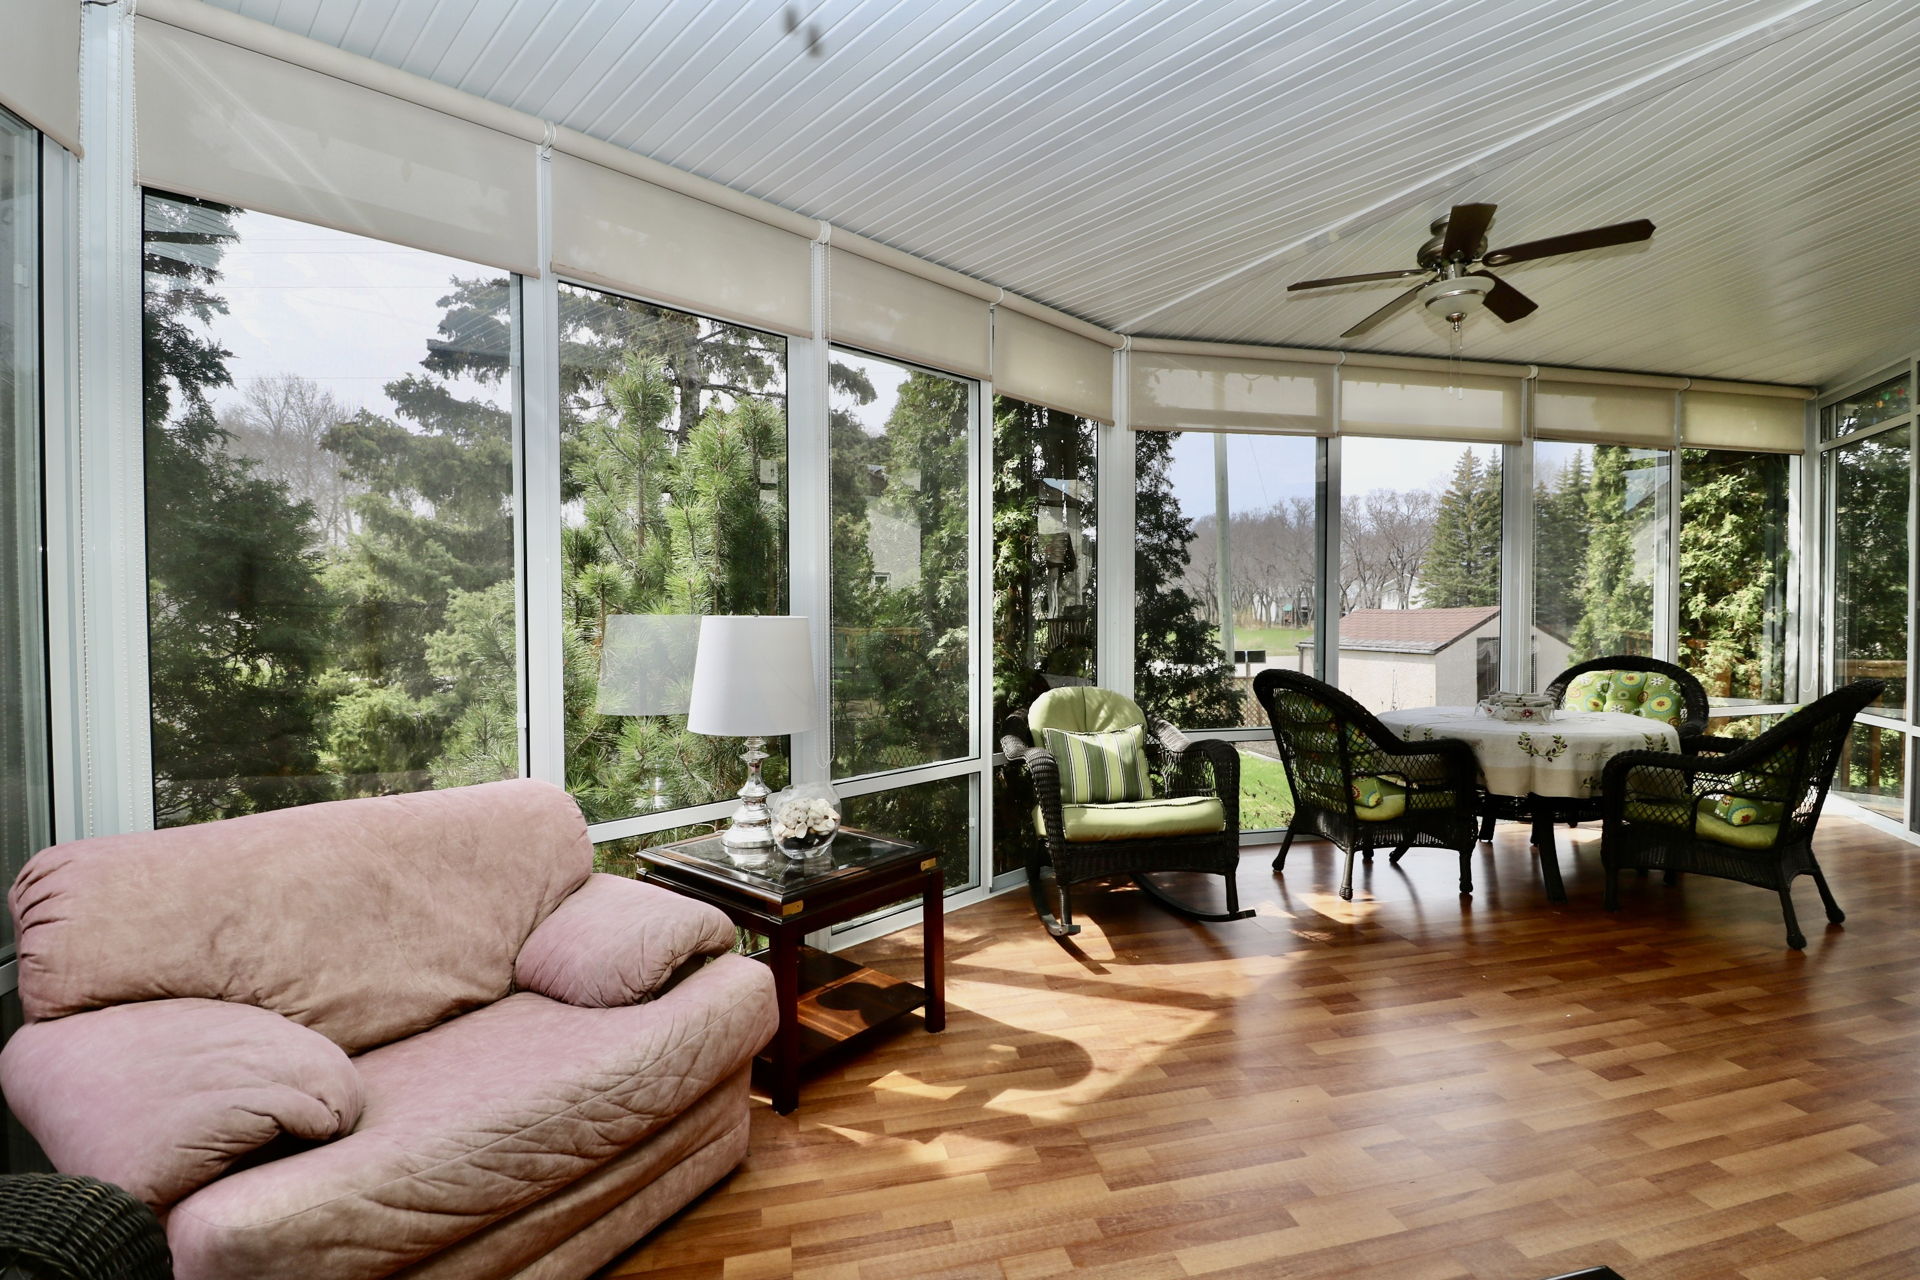 sunroom / solarium with wood-type flooring and a ceiling fan